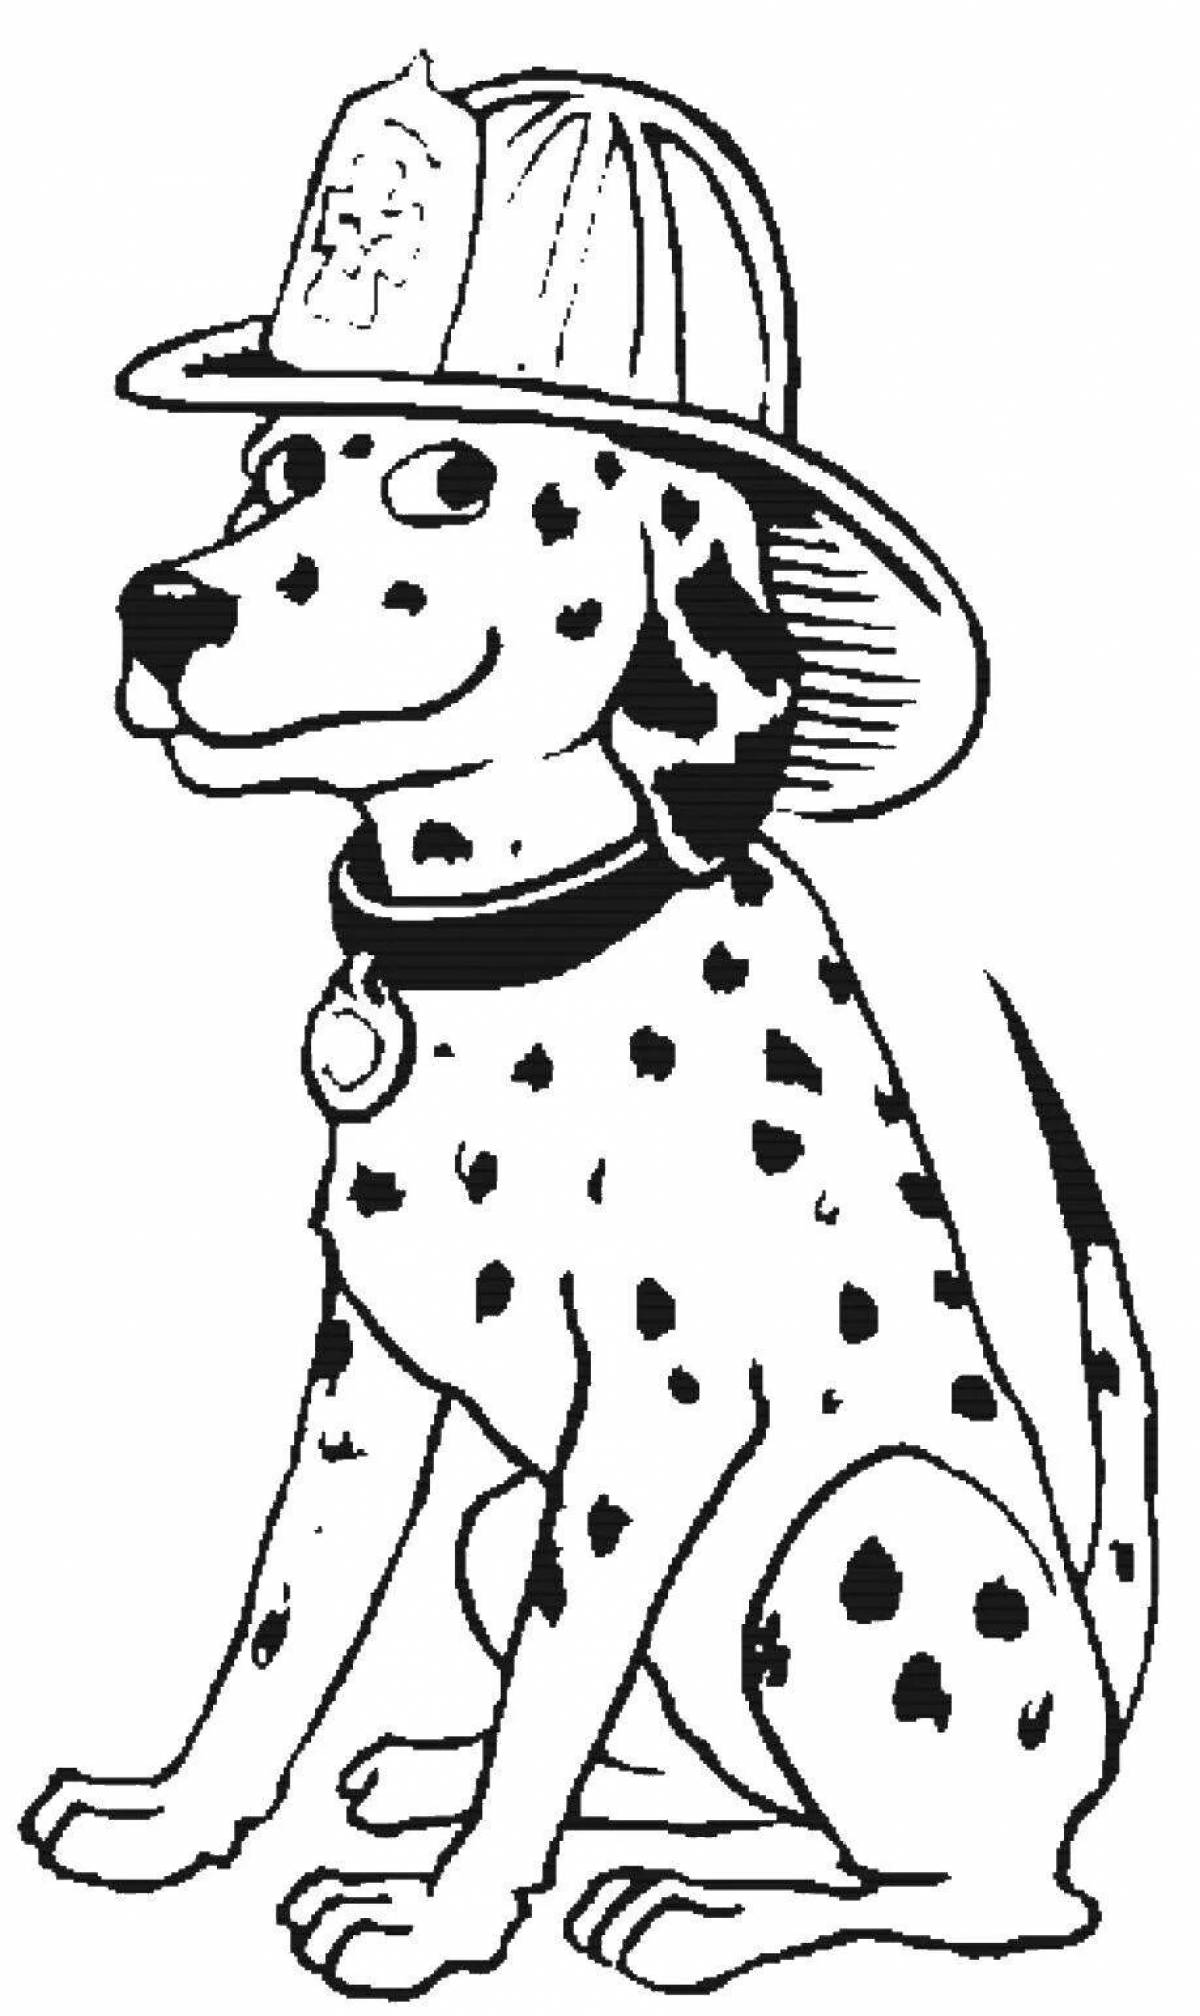 Charming fire dog coloring page